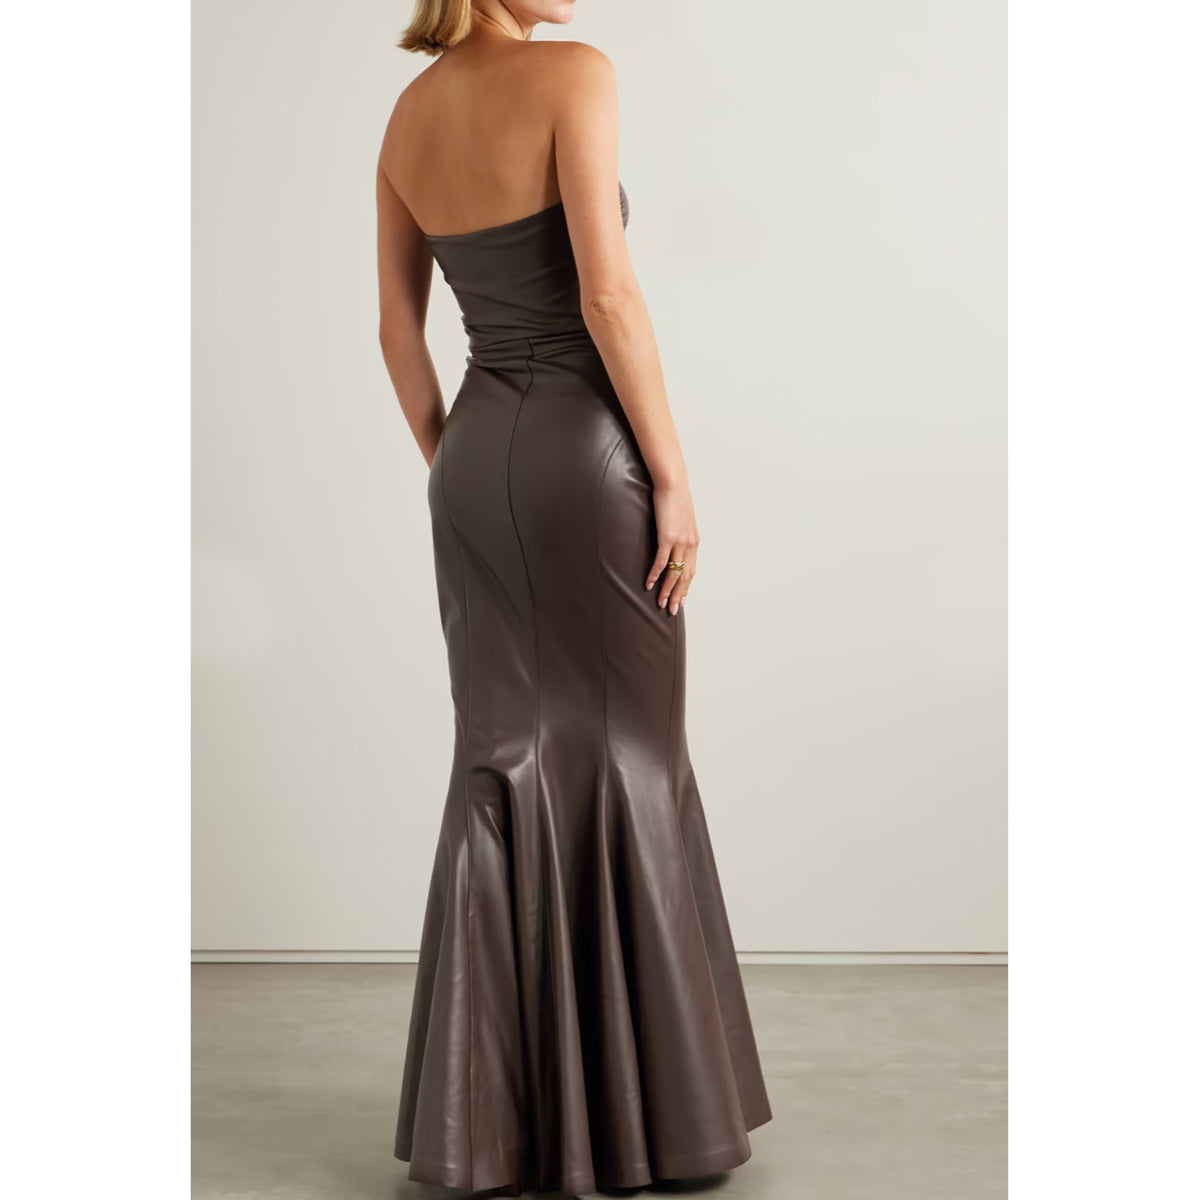 Norma Kamali Strapless Faux Leather Fishtail Gown in Chocolate